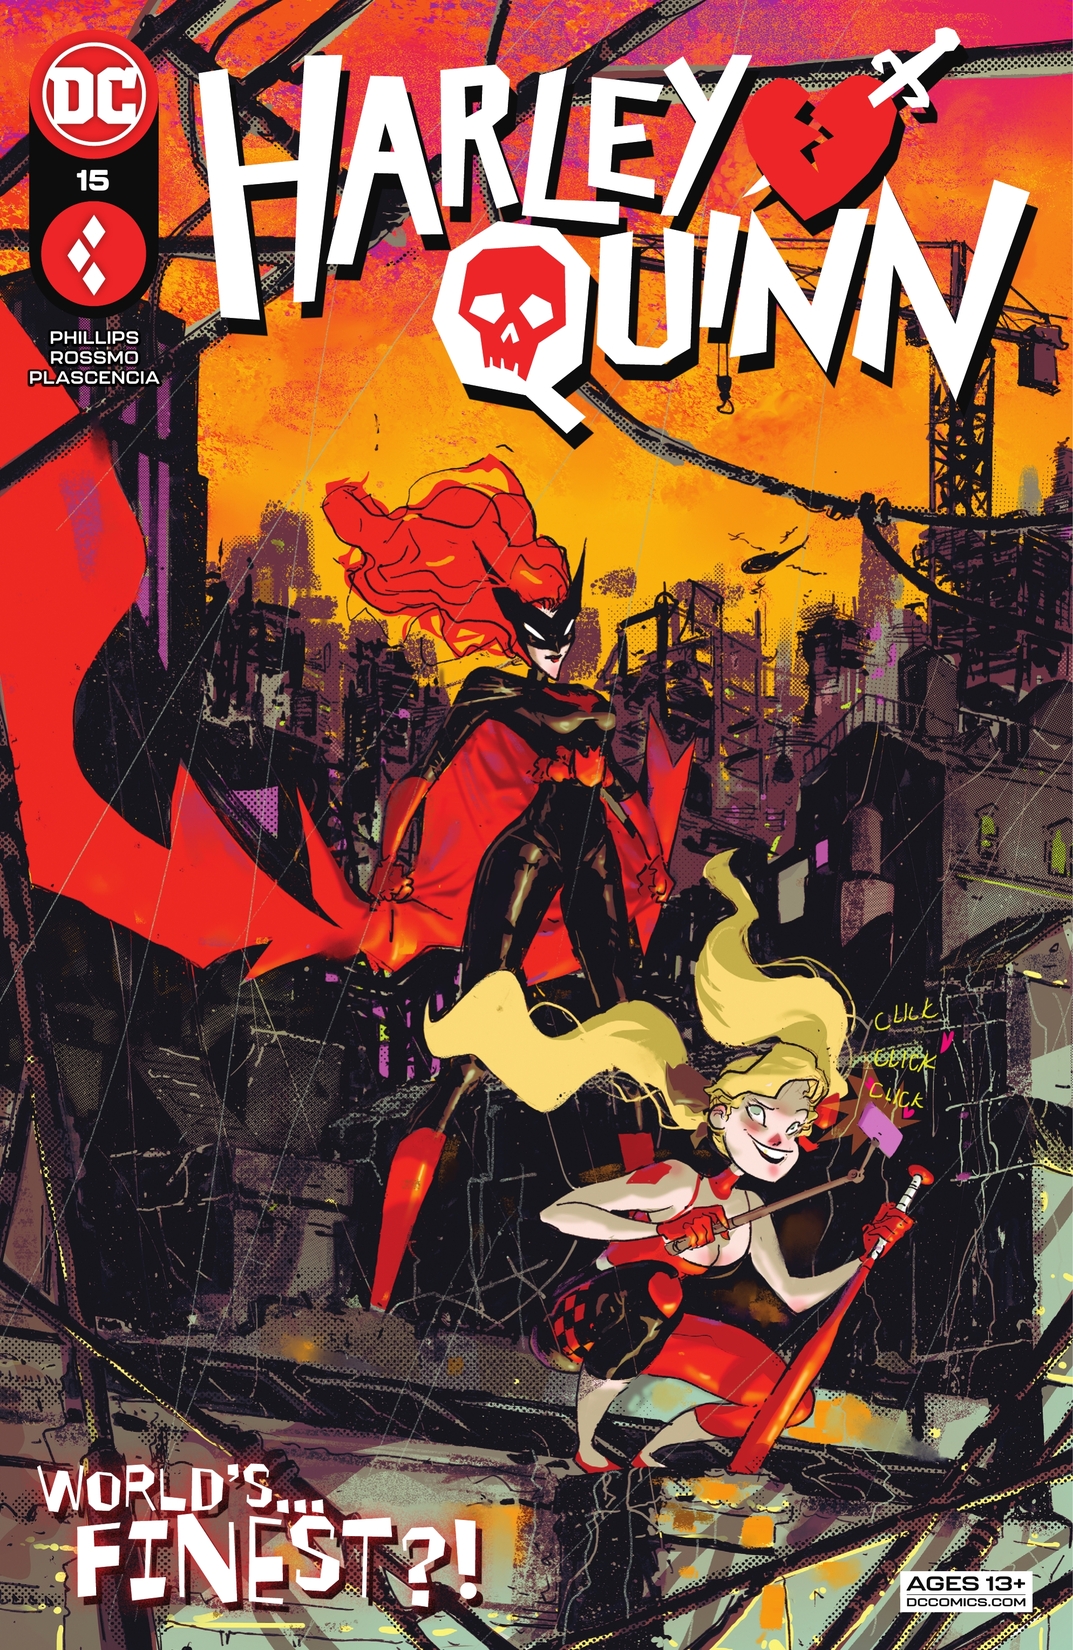 Harley Quinn #15 preview images